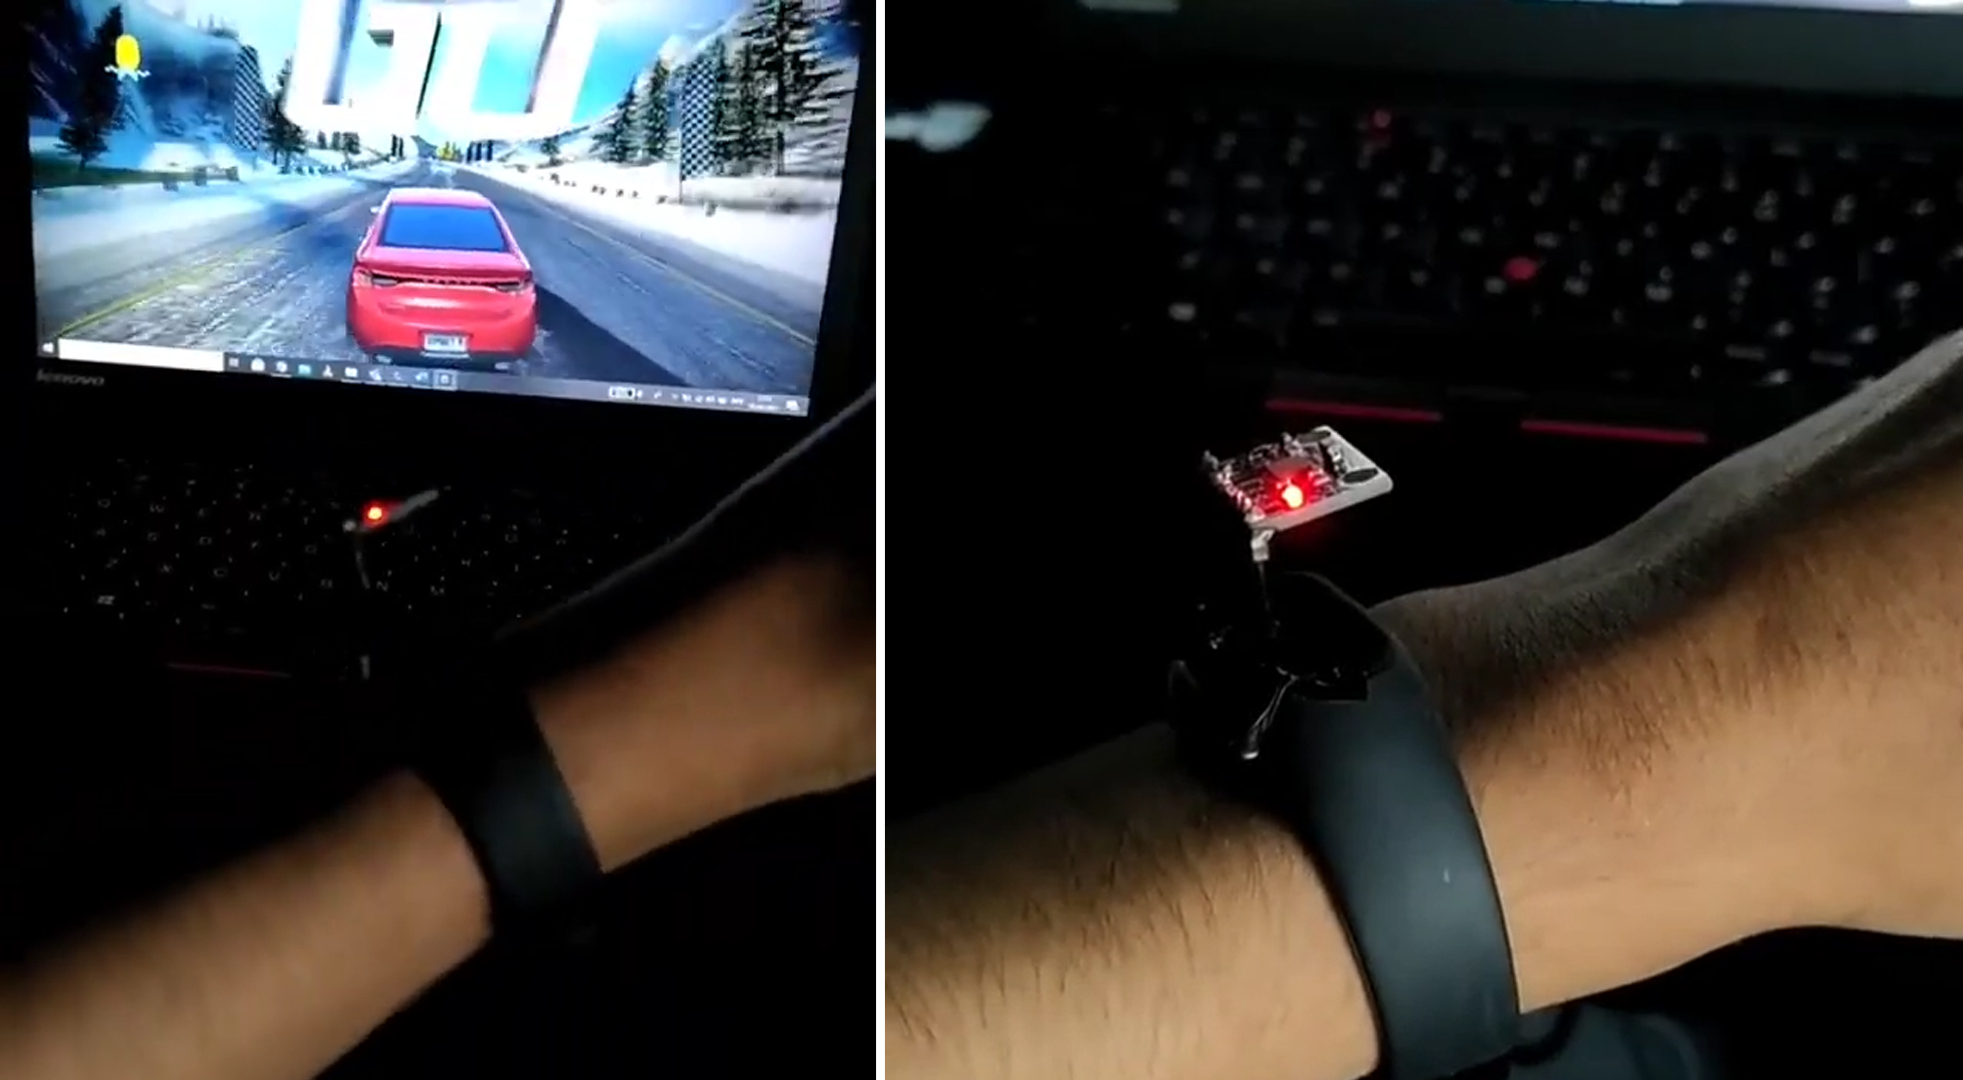 raspberry-pi-pico-uses-hand-gestures-to-drive-in-asphalt-8